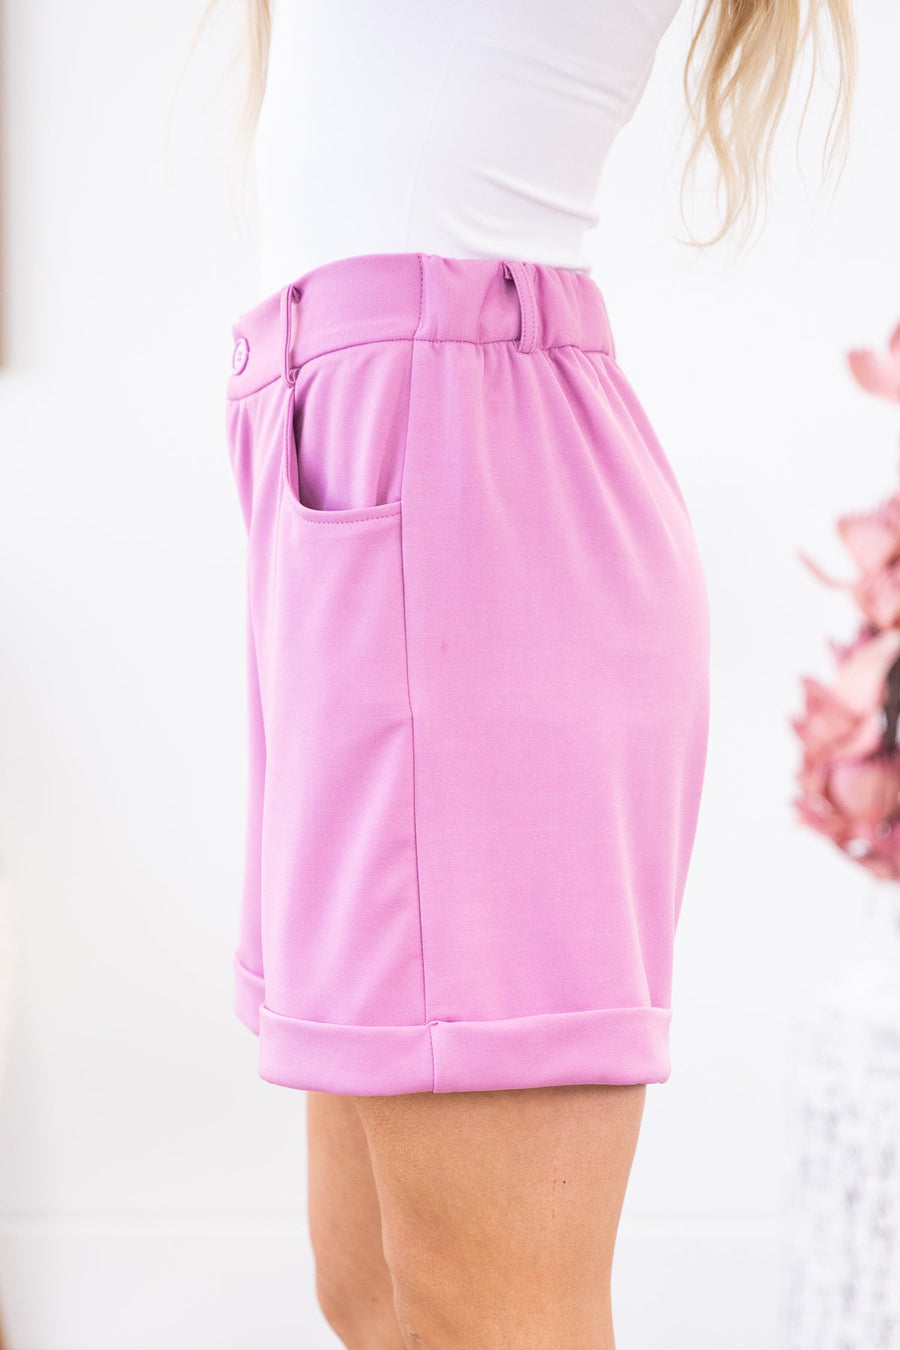 Orchid Cuffed Shorts - Filly Flair